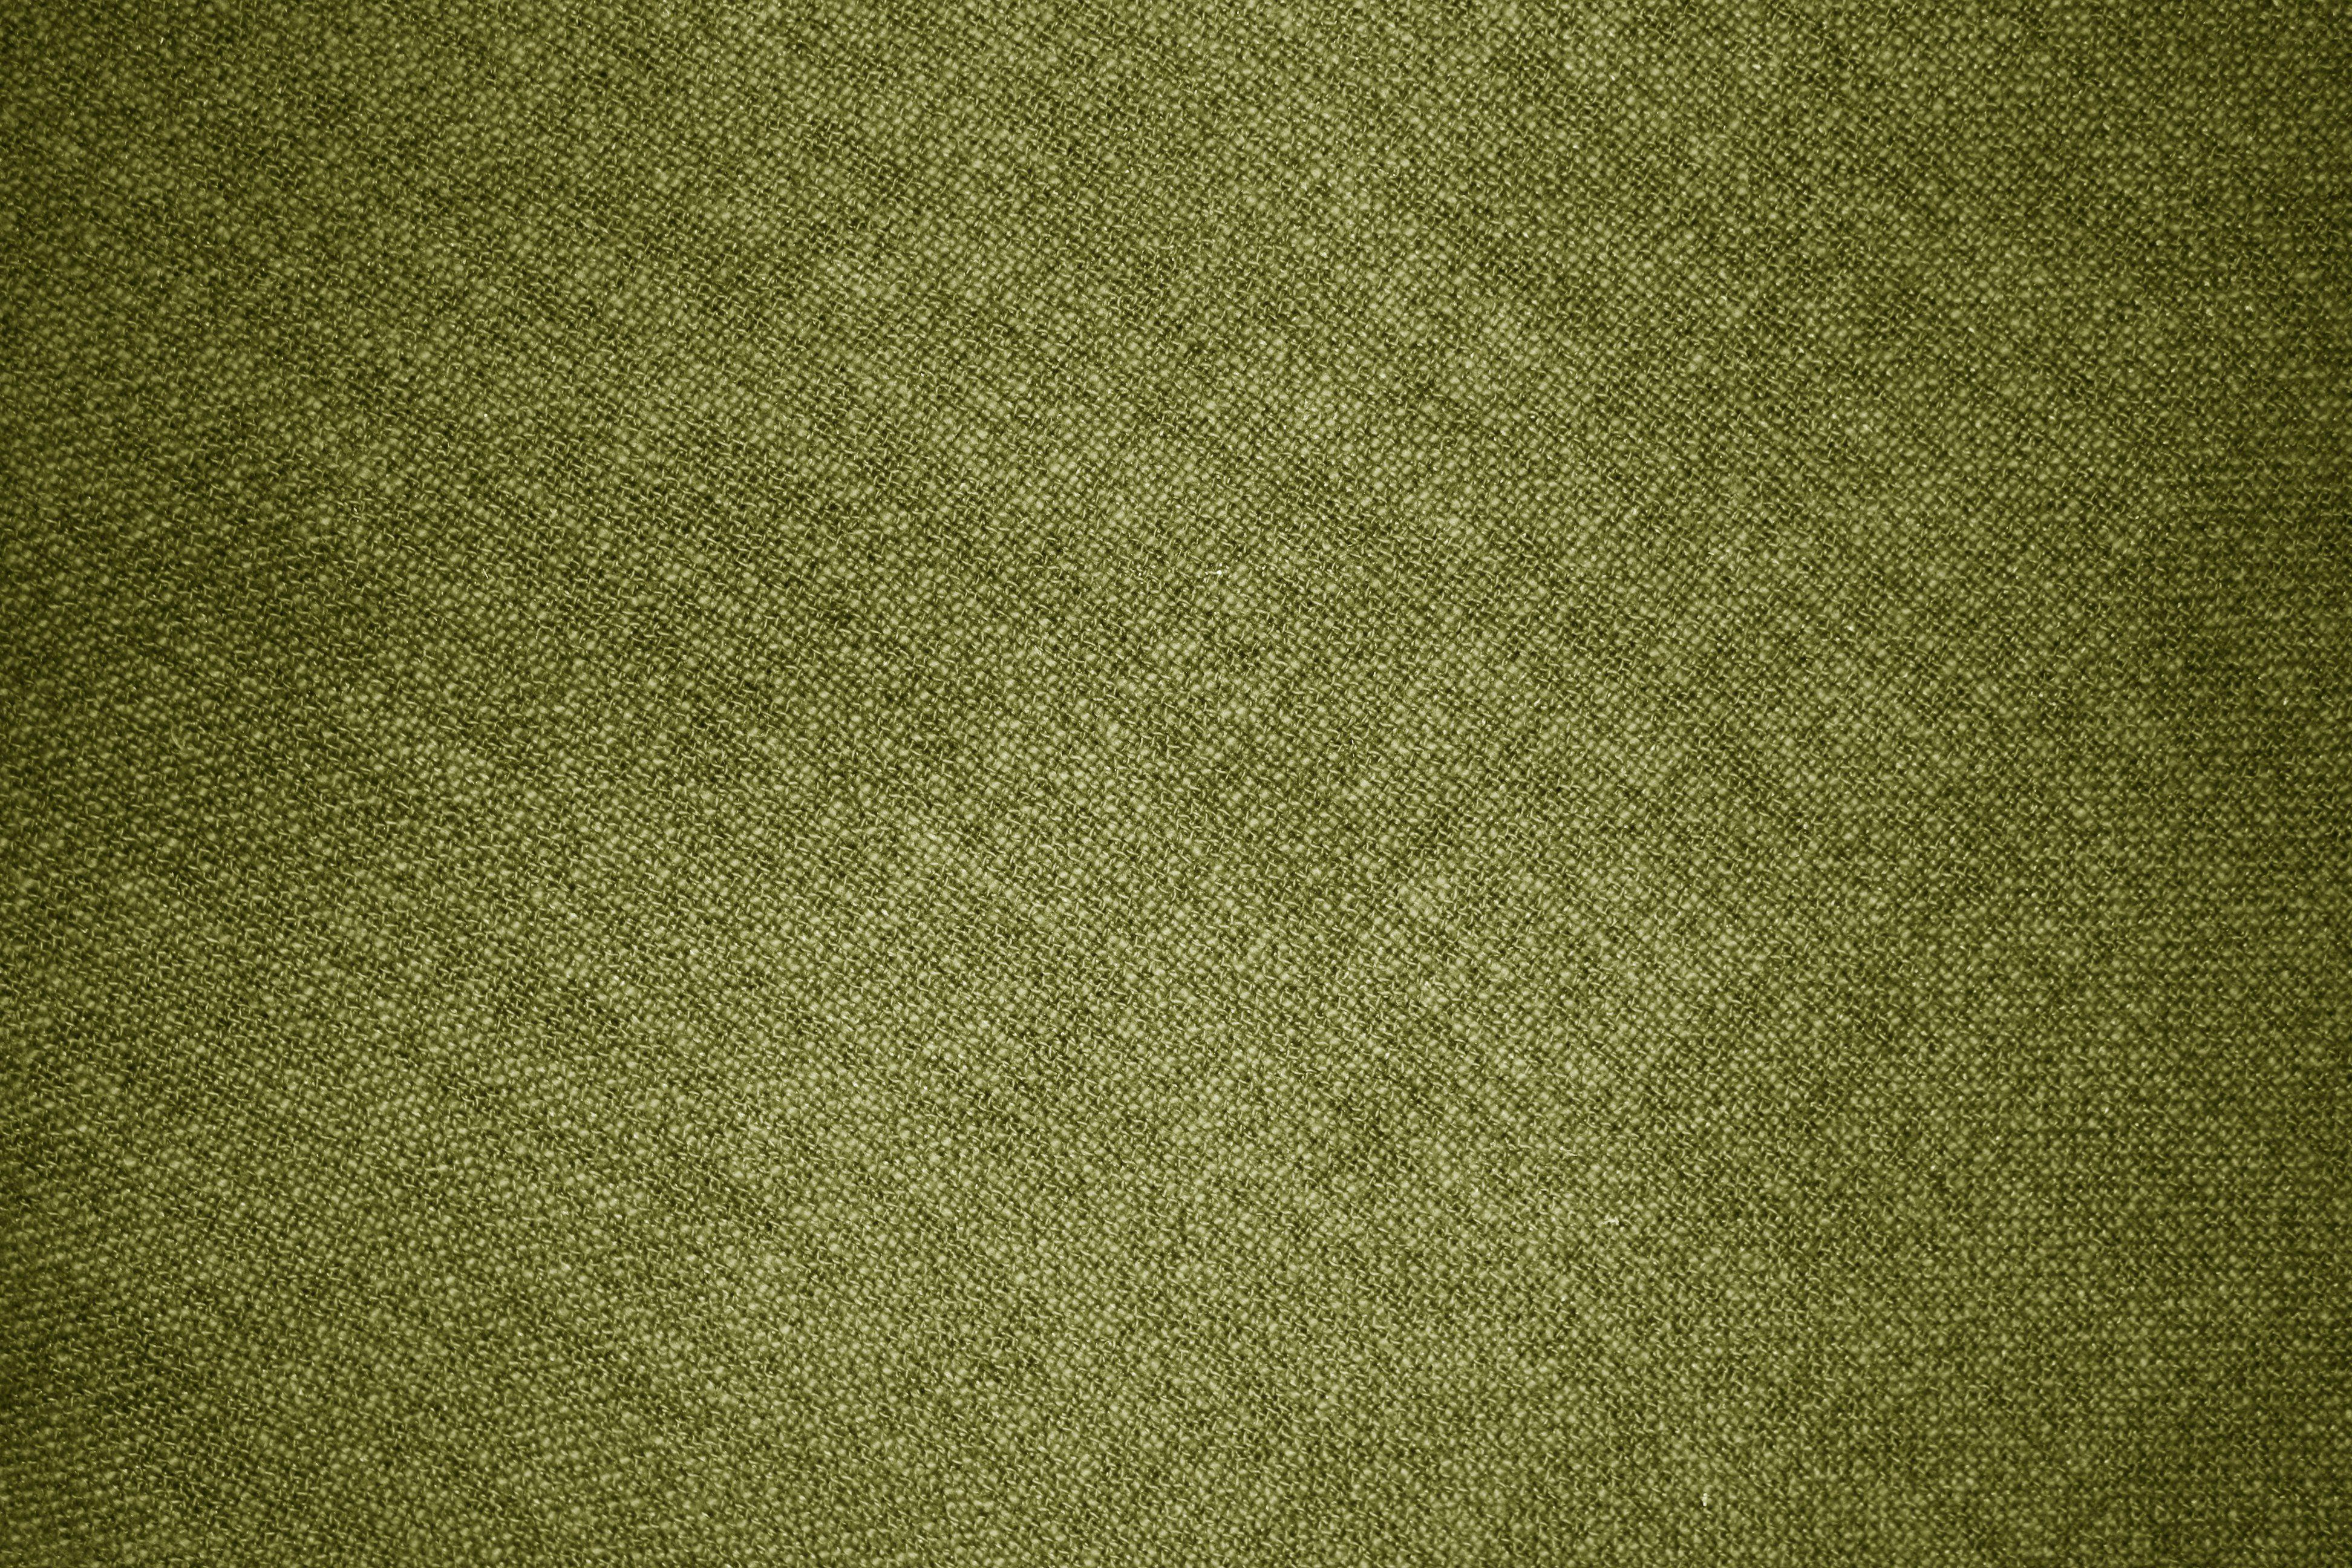 0 Olive Green Iphone Background s  Wallpaperscom